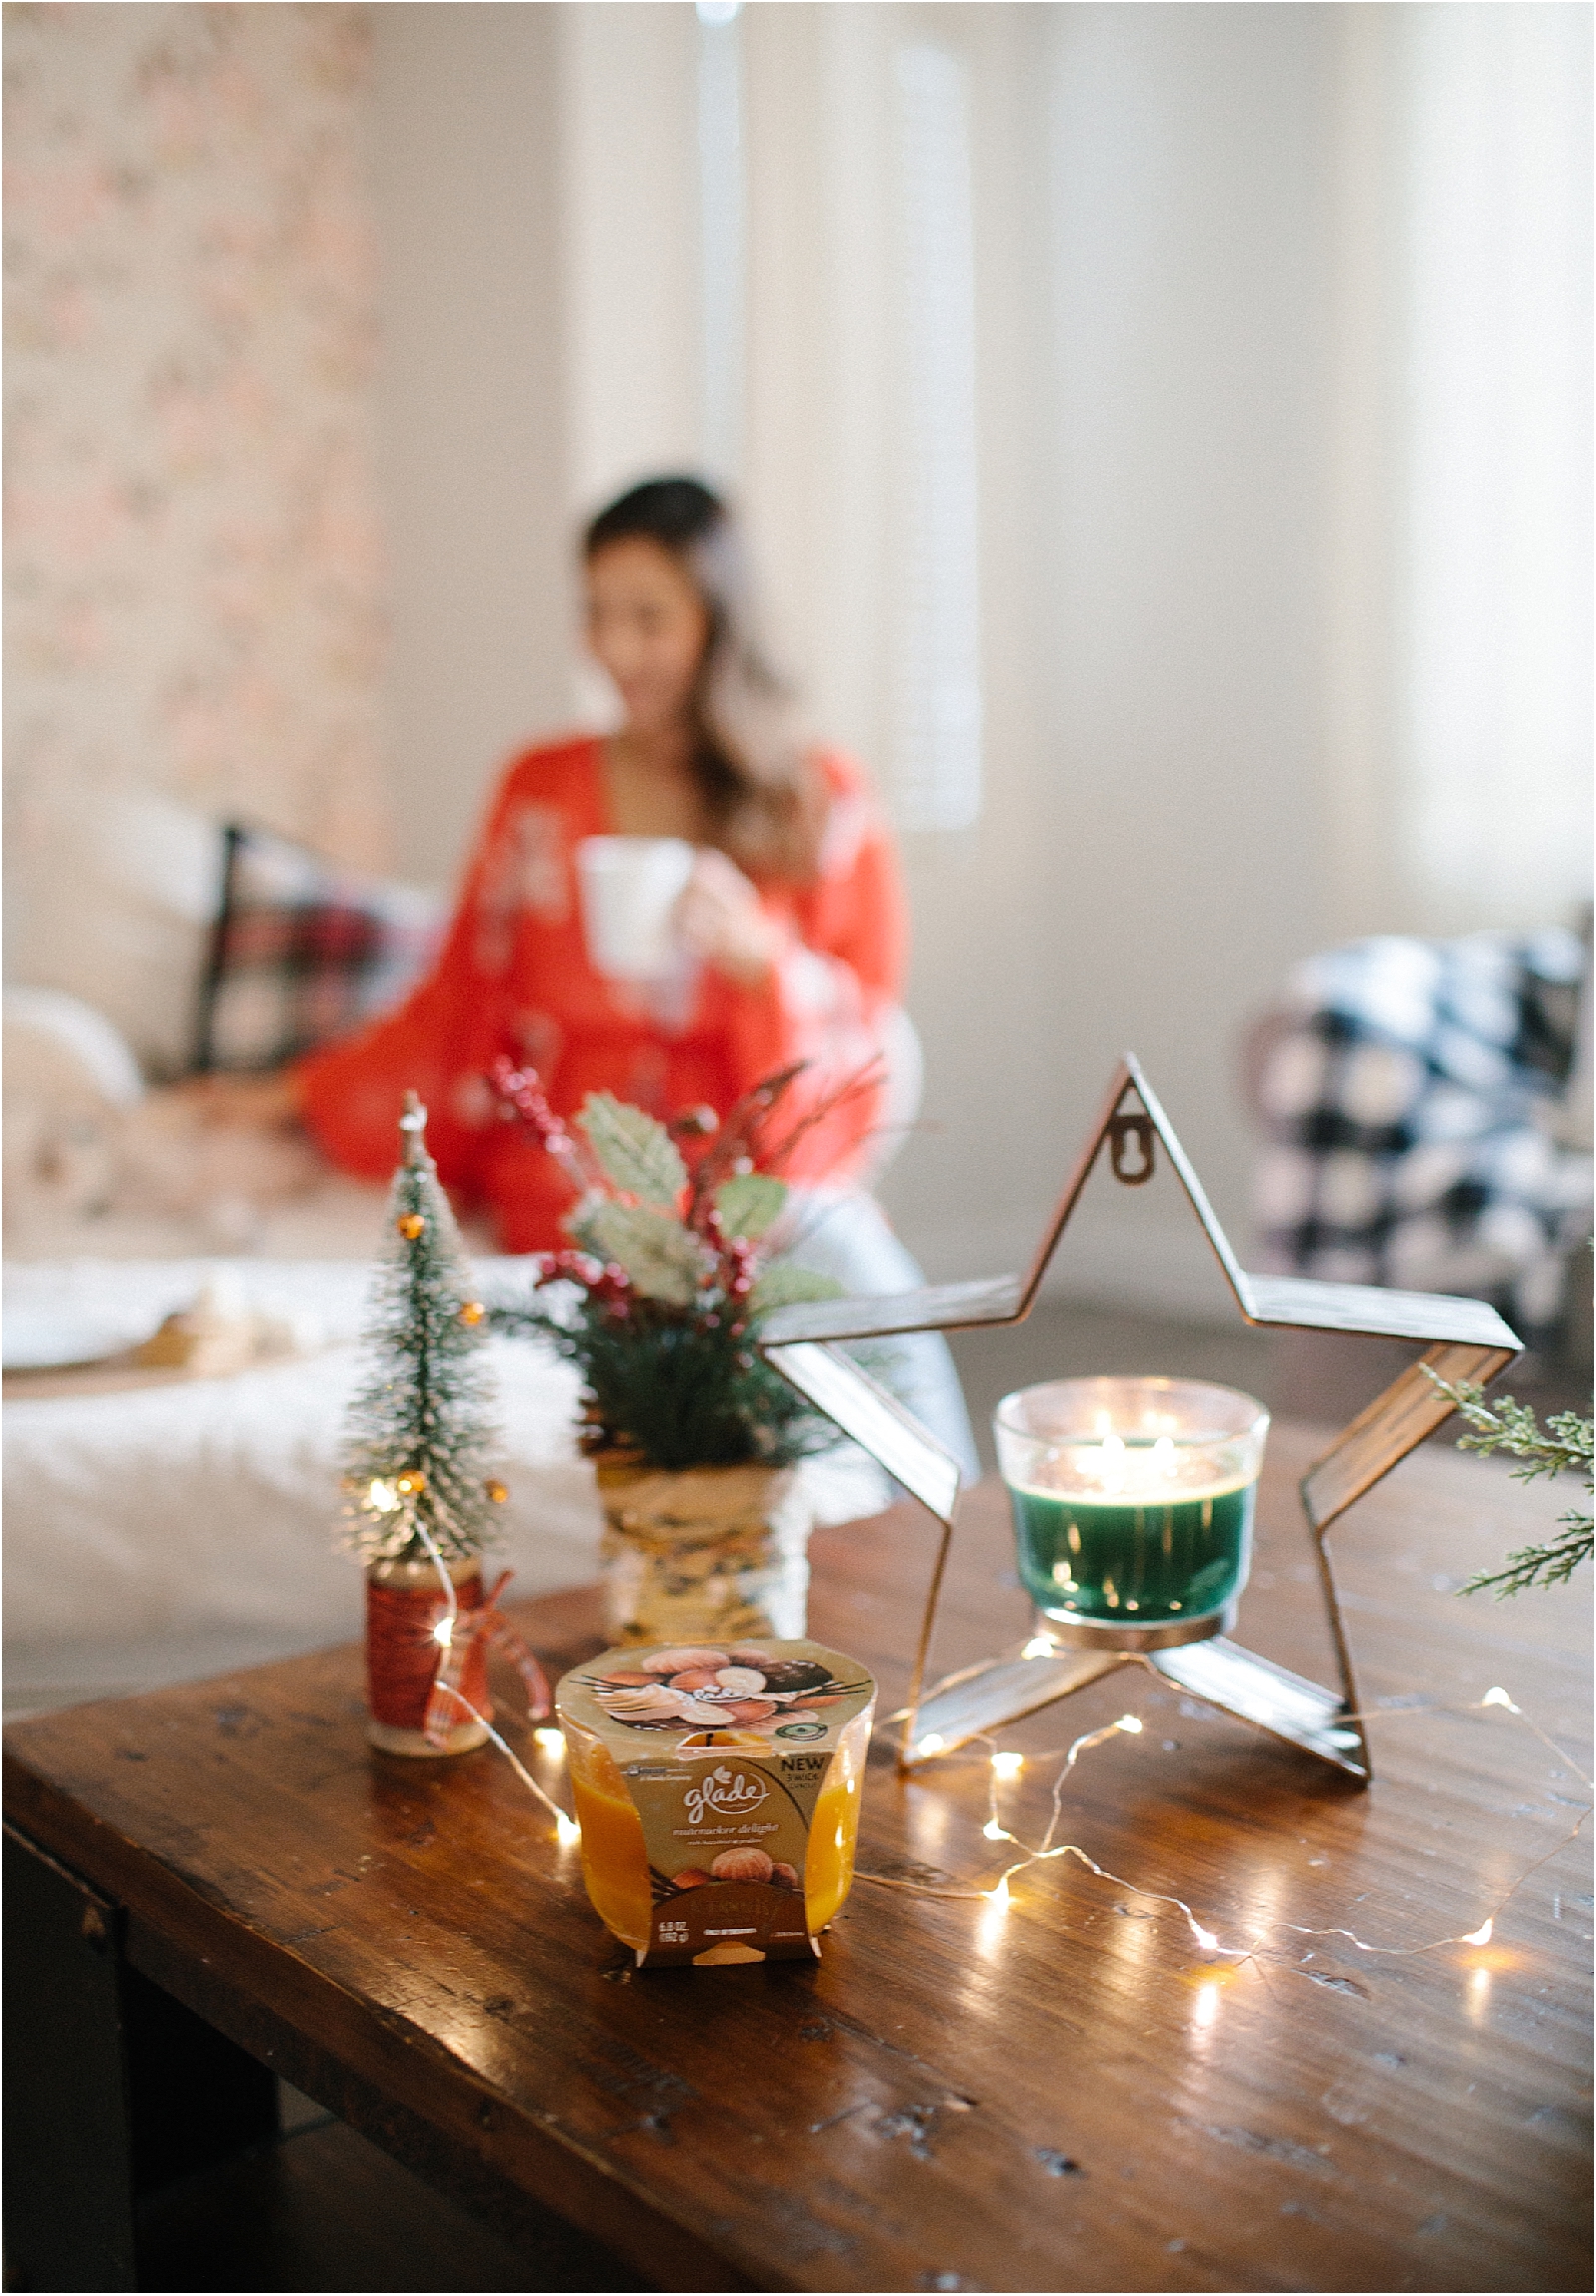 Creating The Perfect Holiday Vibes with Glade Candles